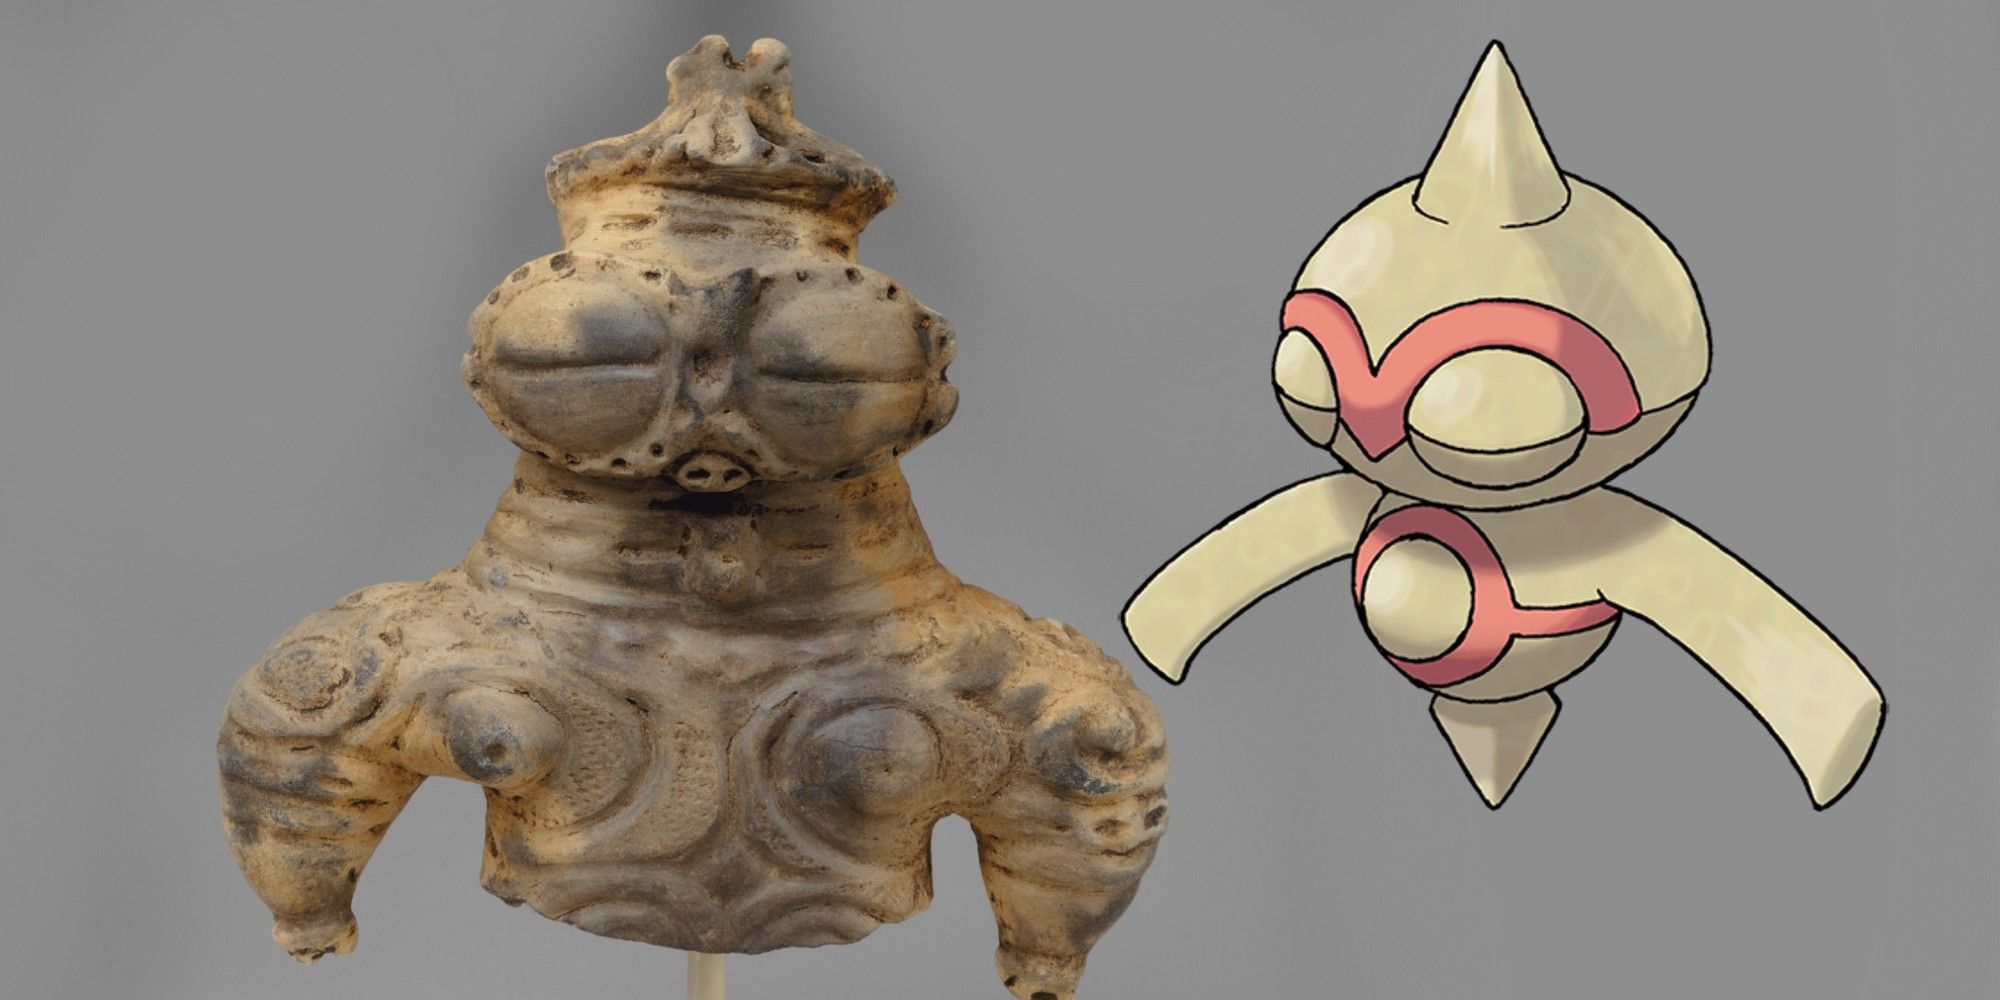 Pokémon designs influenced by real-world history: Baltoy resembles the Dogu statues. 